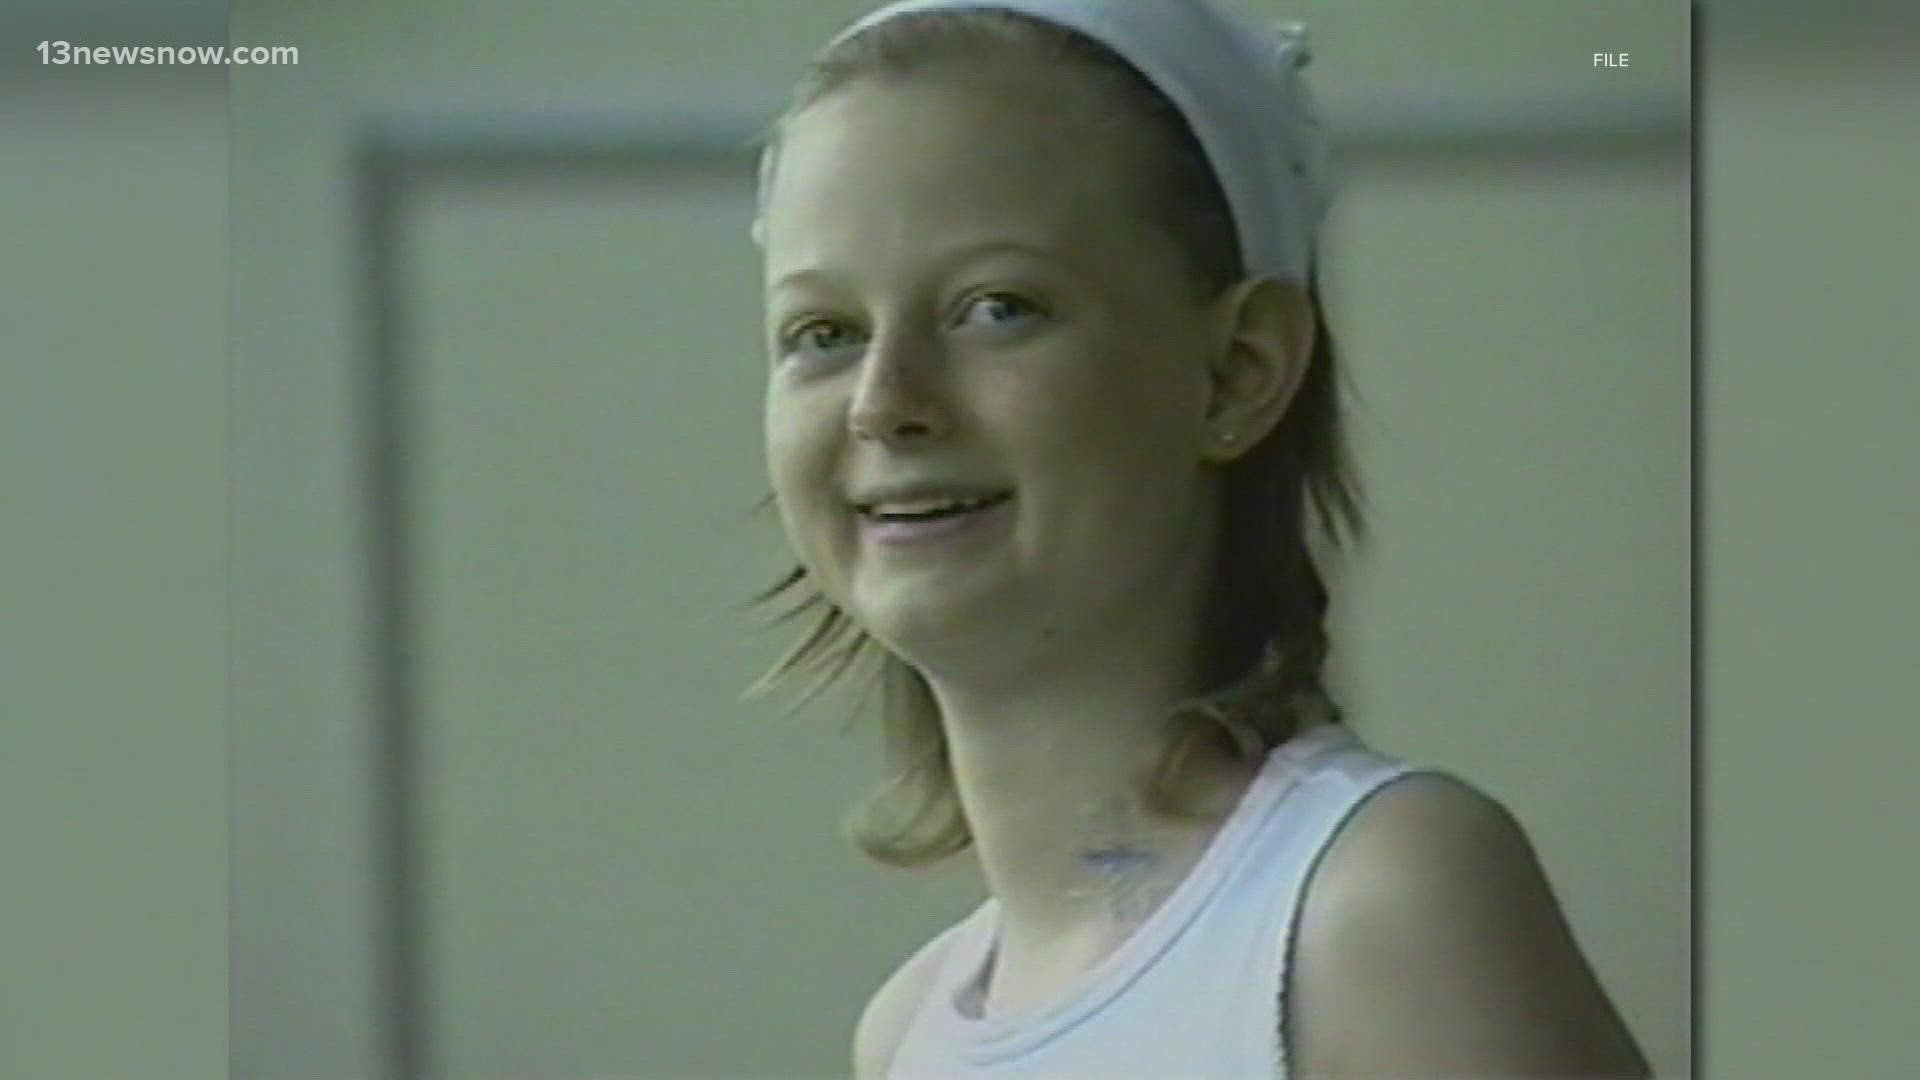 We look back at the story of Ashley Hewitt, a 14-year-old who died of cancer in 2001.